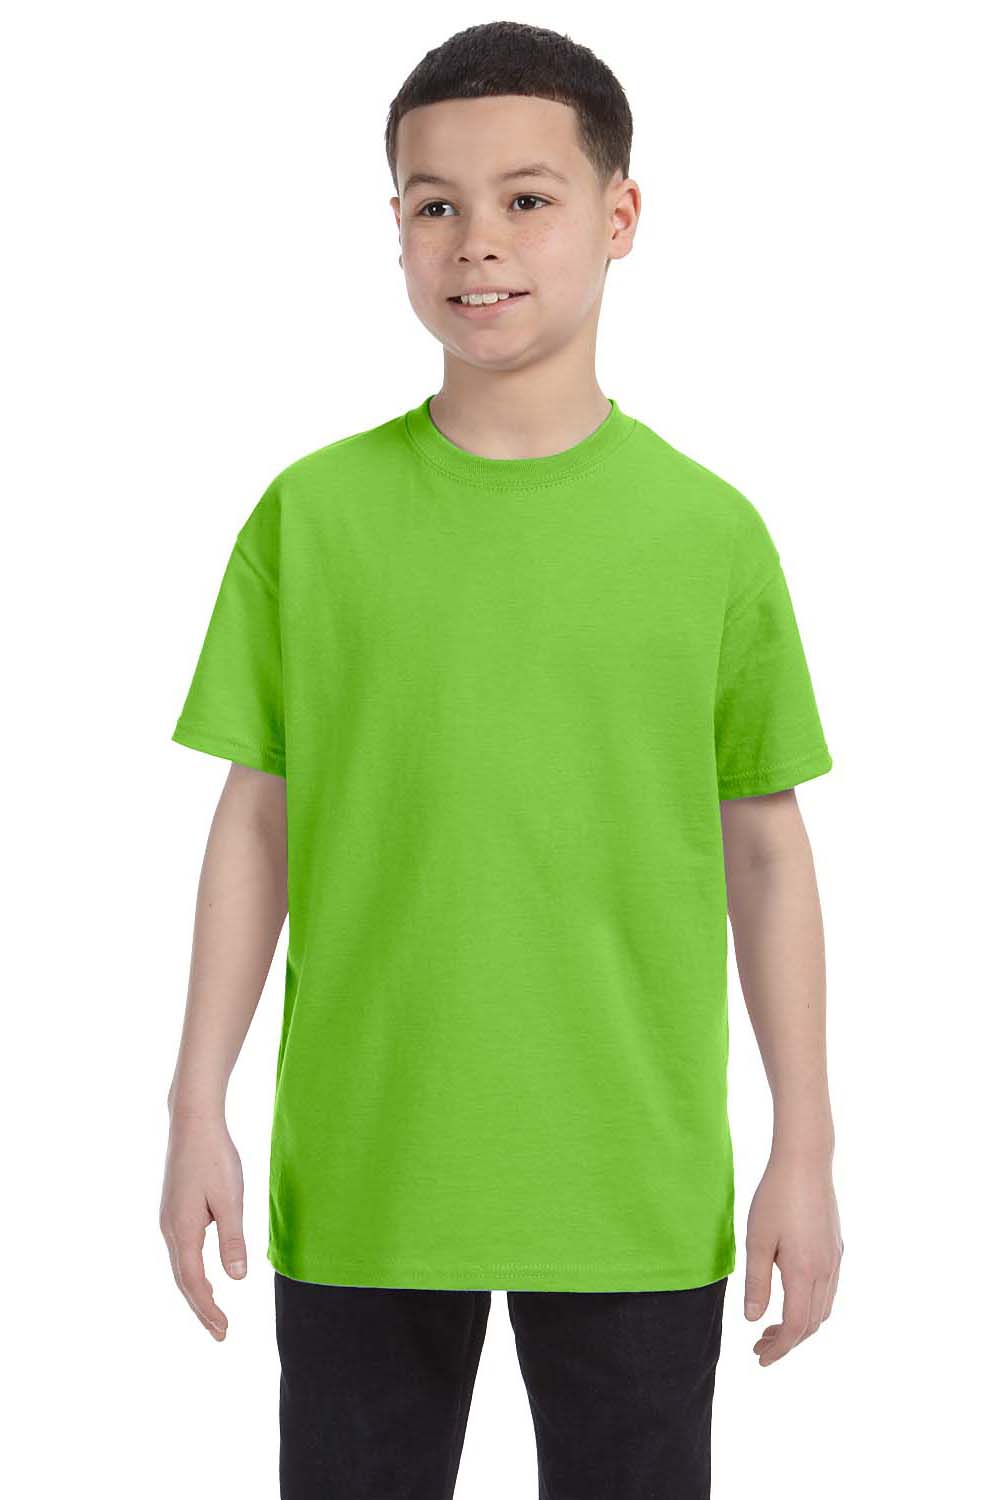 Hanes 54500 Youth ComfortSoft Short Sleeve Crewneck T-Shirt Lime Green Front